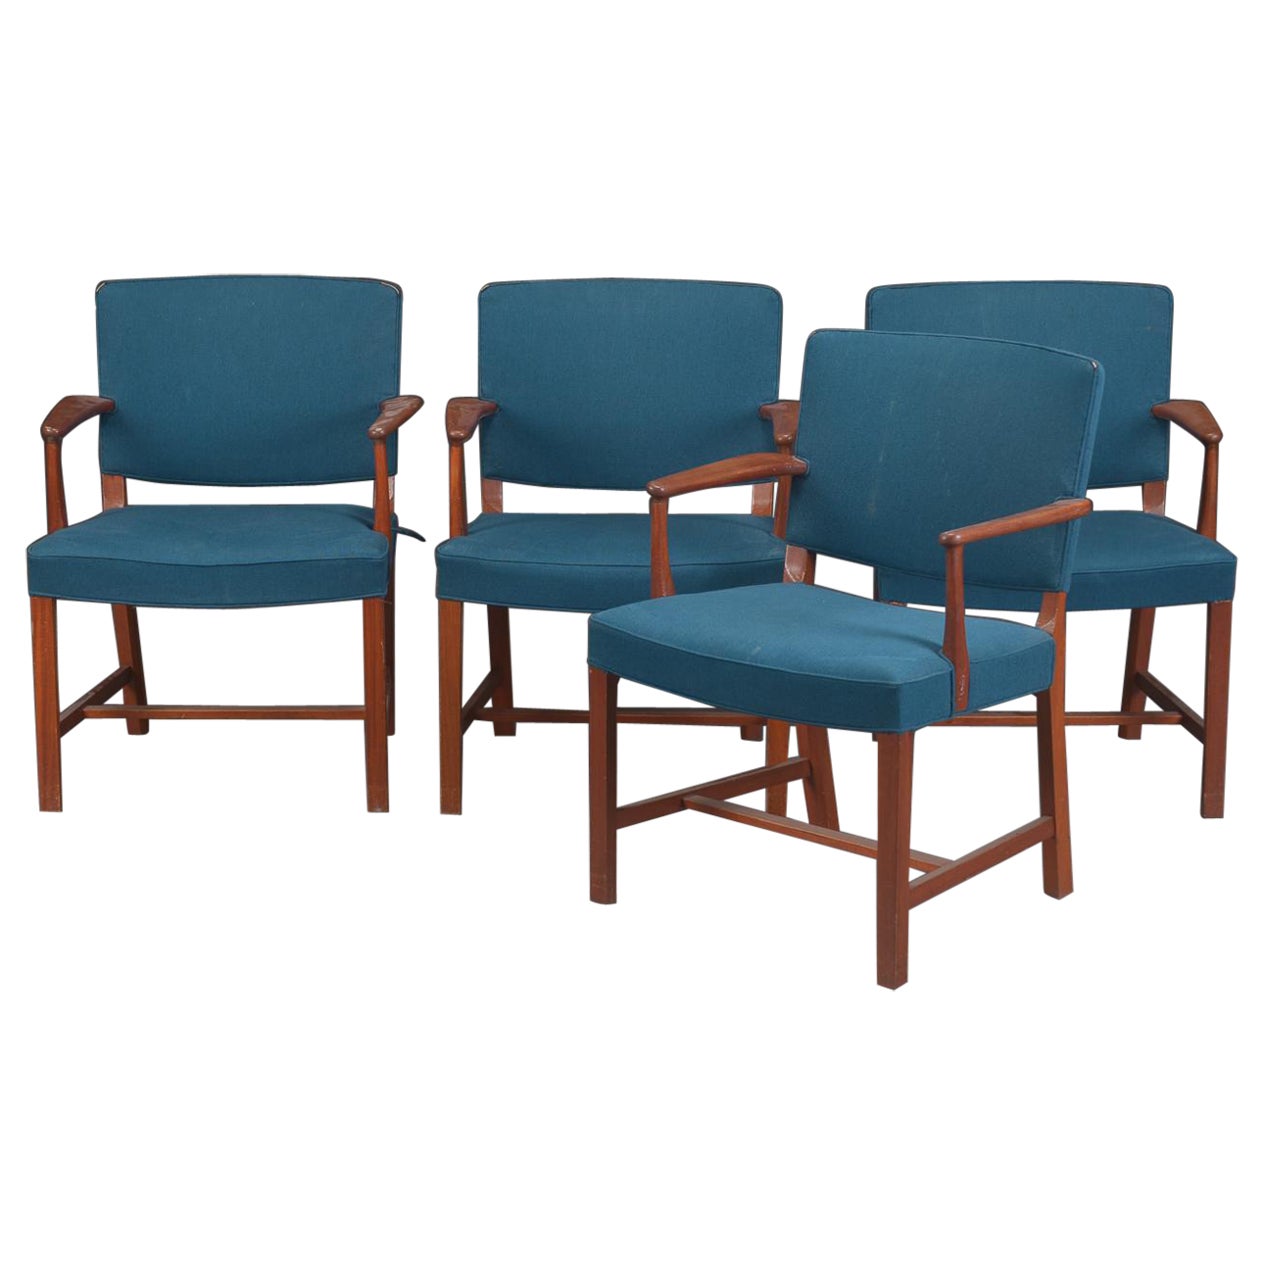 Set of Four Danish 1940s Mahogany Side or Desk Chairs with Open Armrests